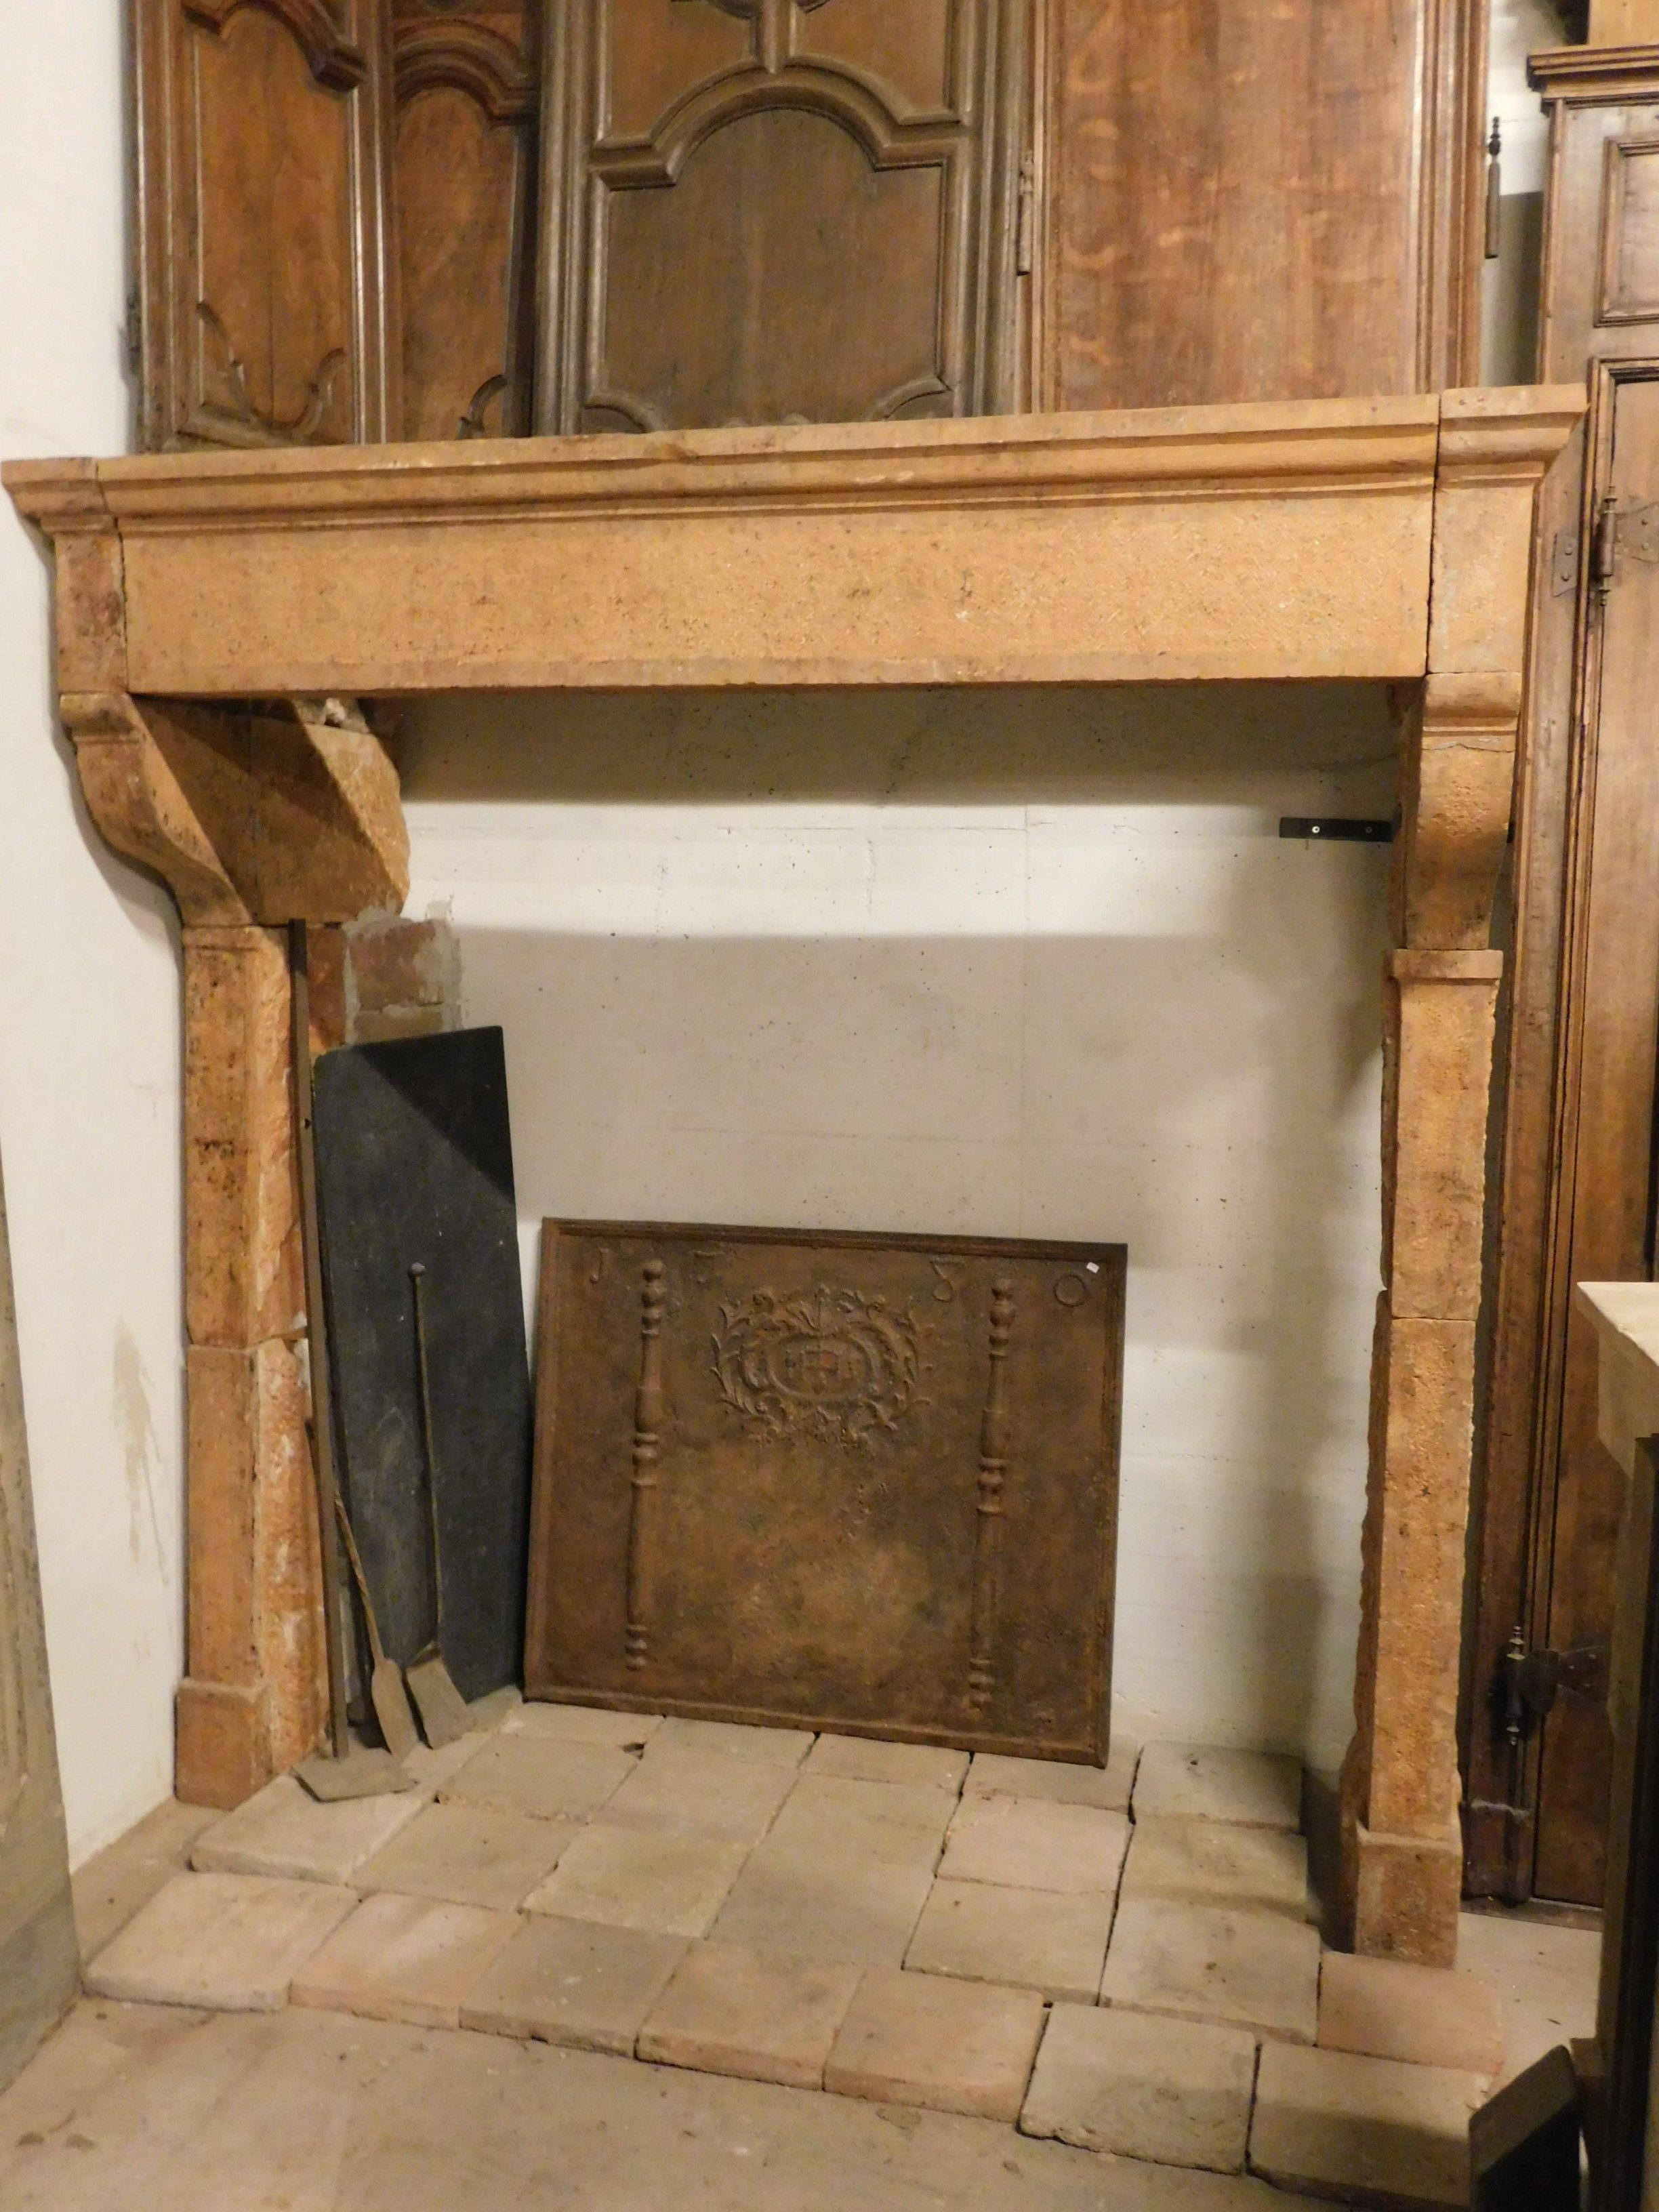 Ancient and important mantel fireplace, hand-carved in burgundy stone, with typical orange color of the stone, it was built for large room / kitchen for historic building of the 18th century, origin France, ideal for setting up modern kitchens or